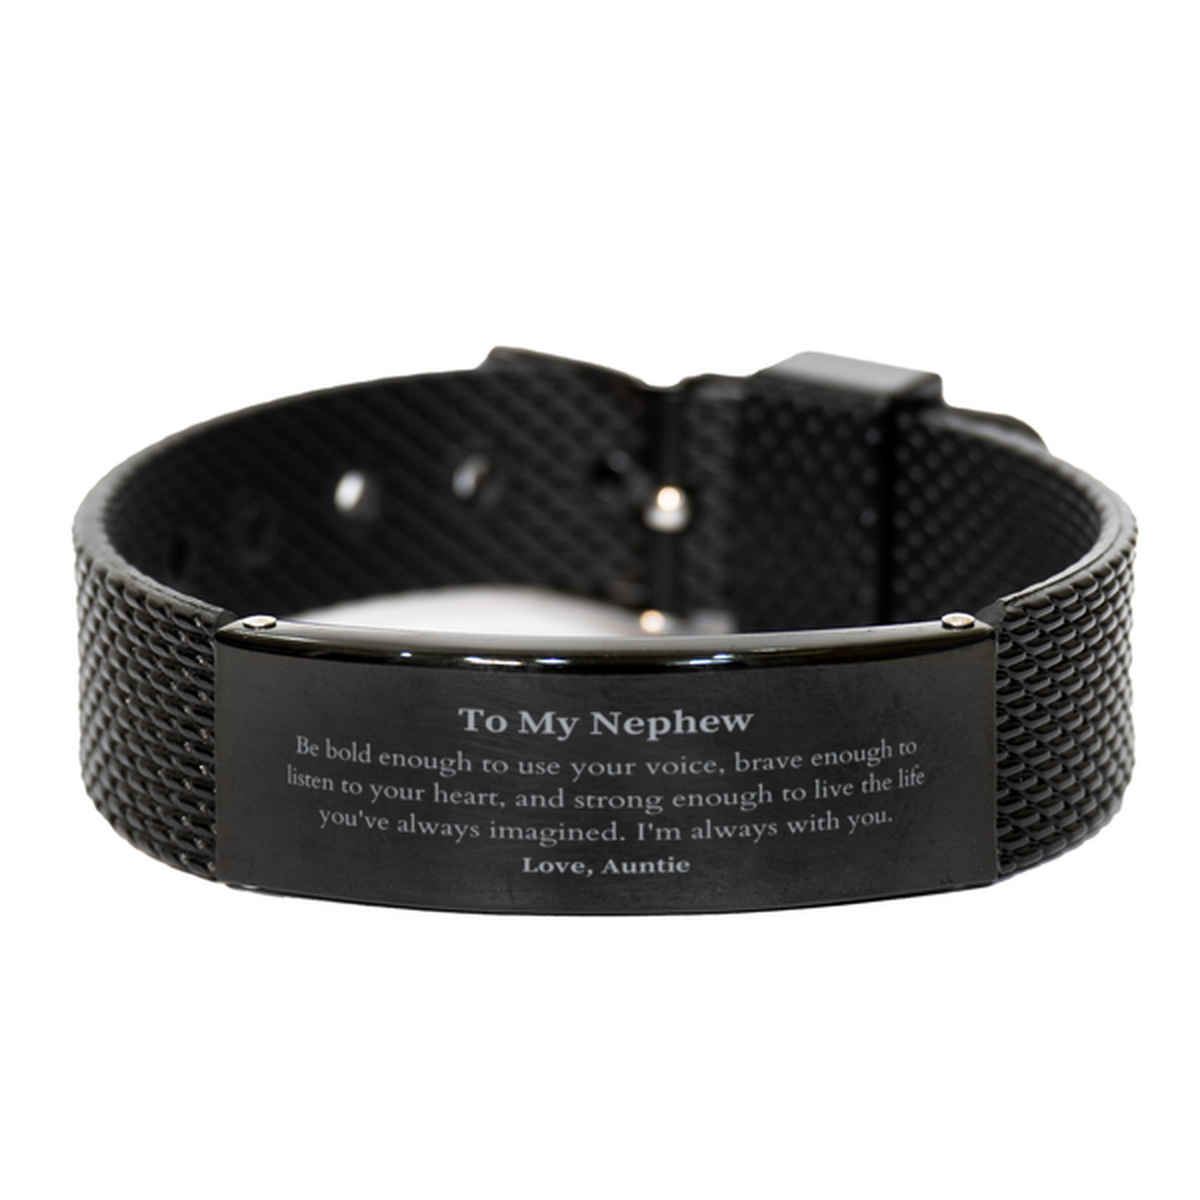 Keepsake Nephew Black Shark Mesh Bracelet Gift Idea Graduation Christmas Birthday Nephew from Auntie, Nephew Be bold enough to use your voice, brave enough to listen to your heart. Love, Auntie